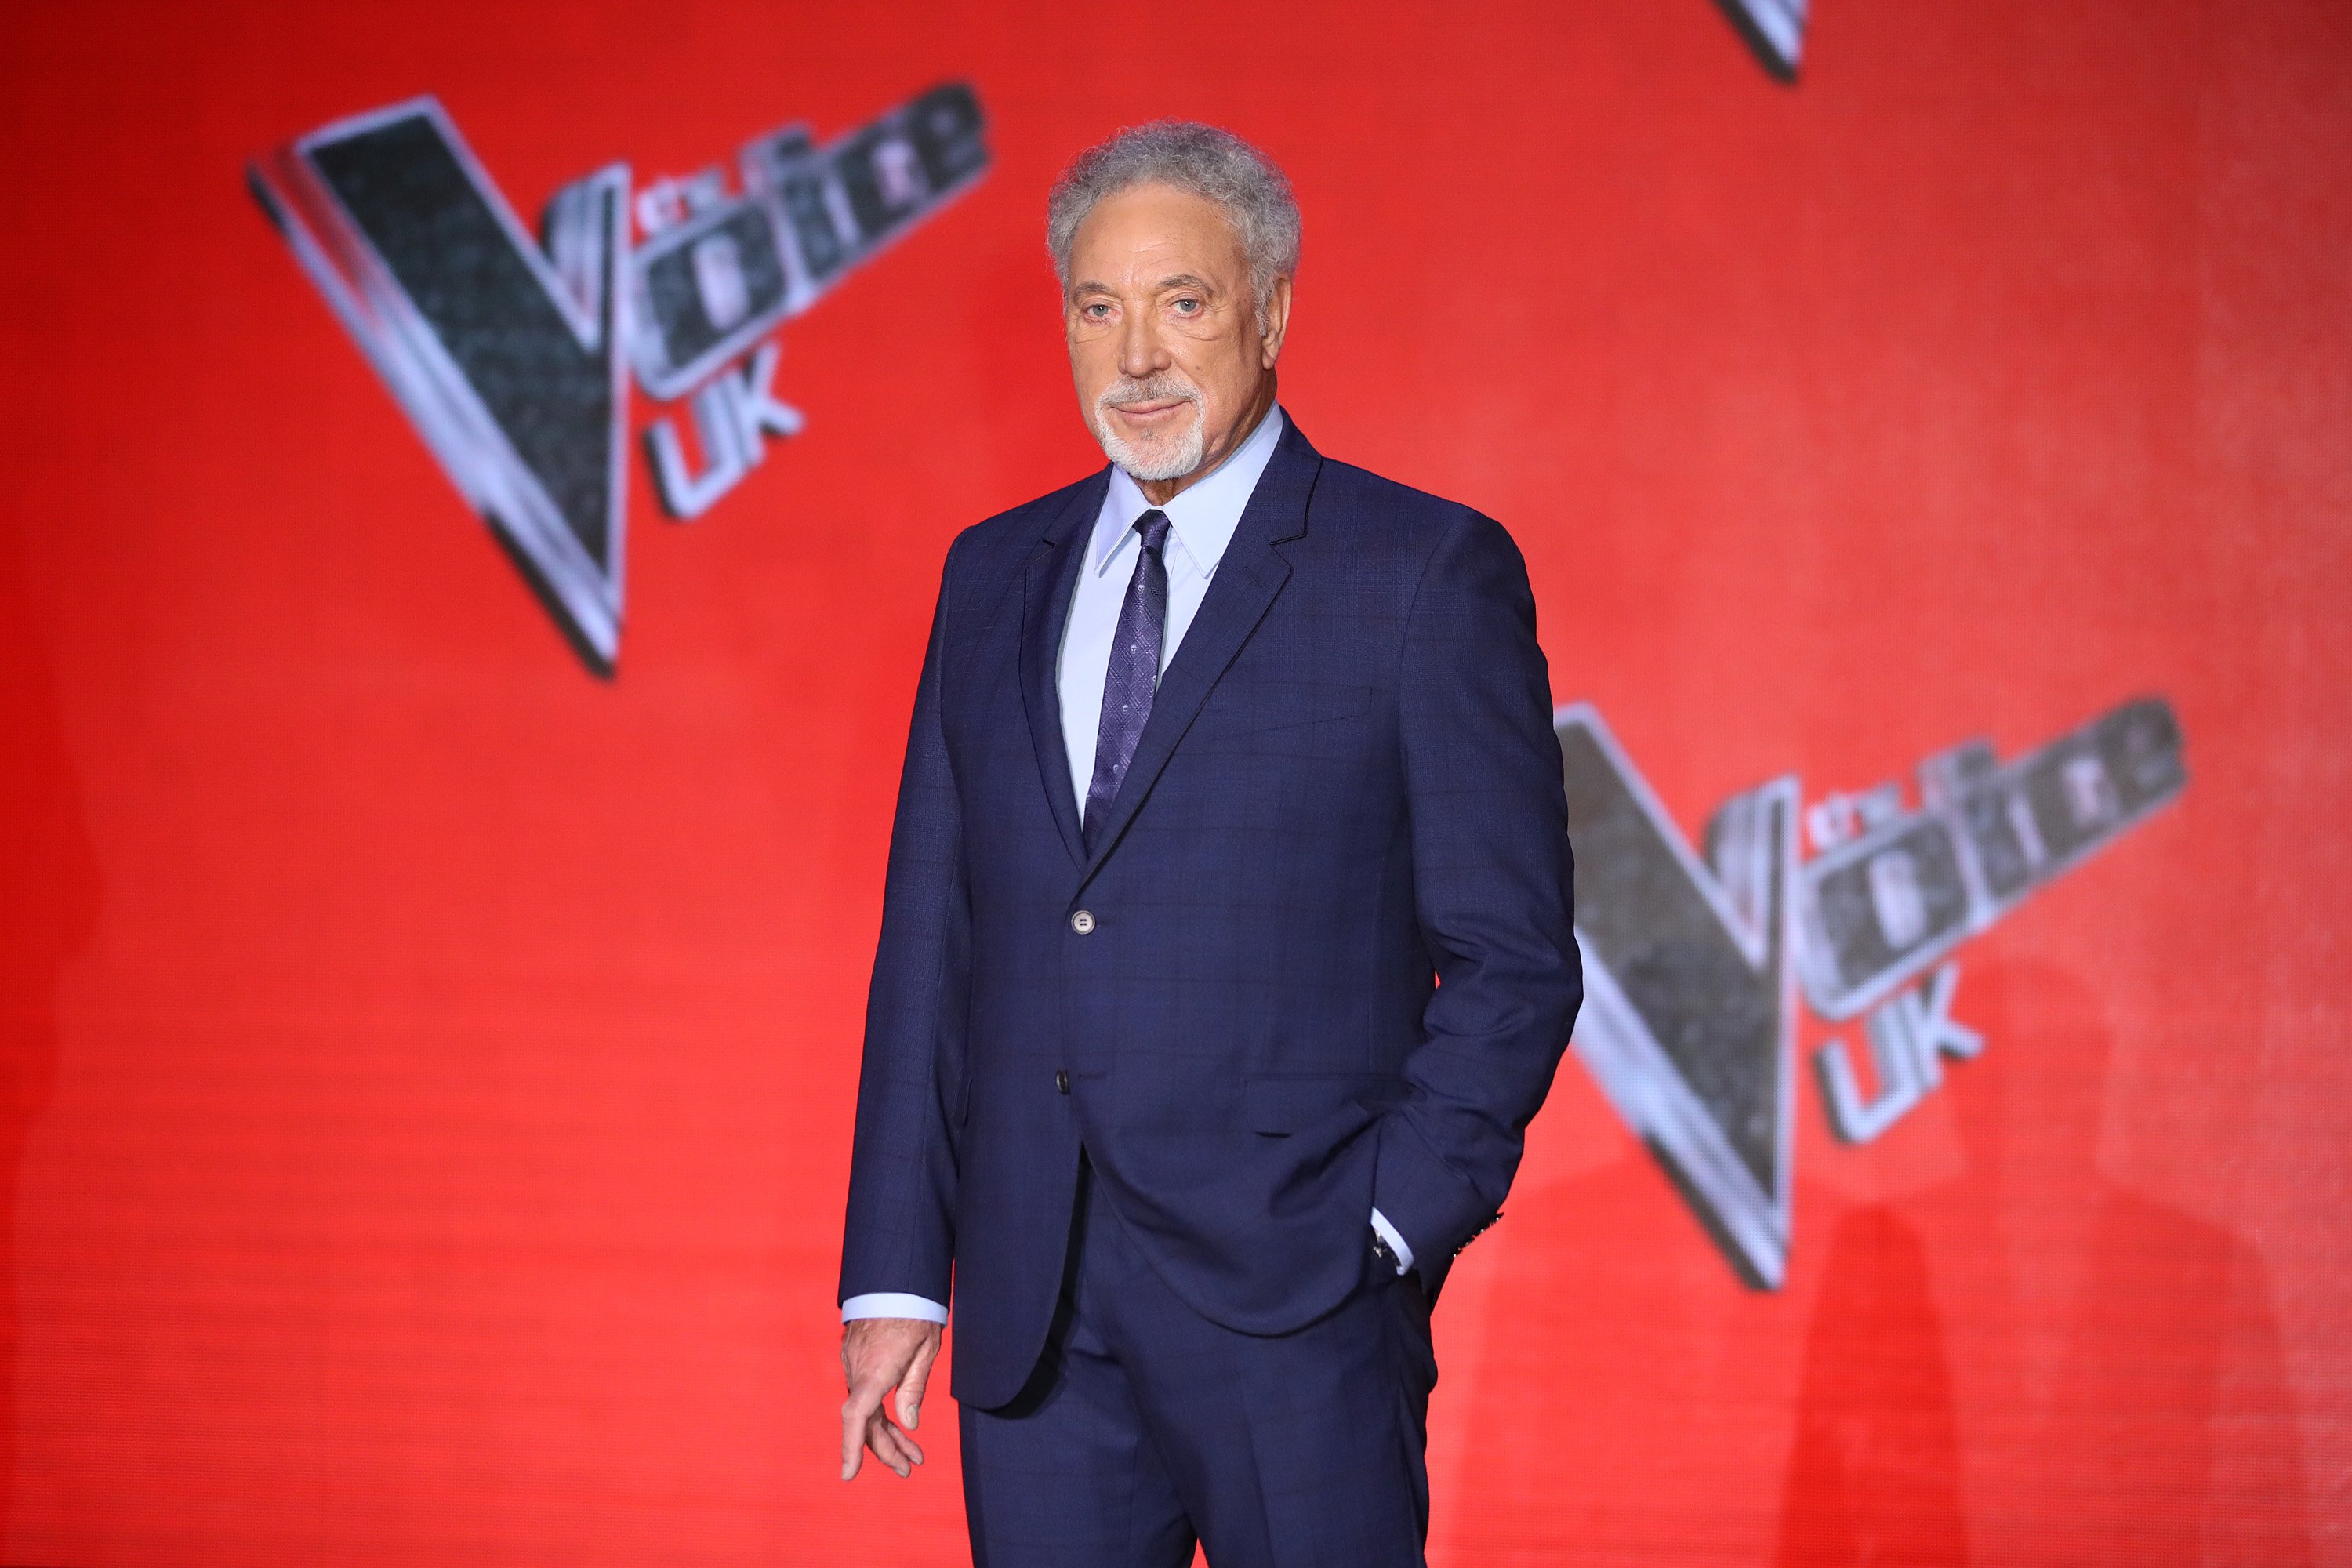 Tom Jones attends the final of The Voice UK on March 29, 2017 in London, United Kingdom. | Source: Getty Images